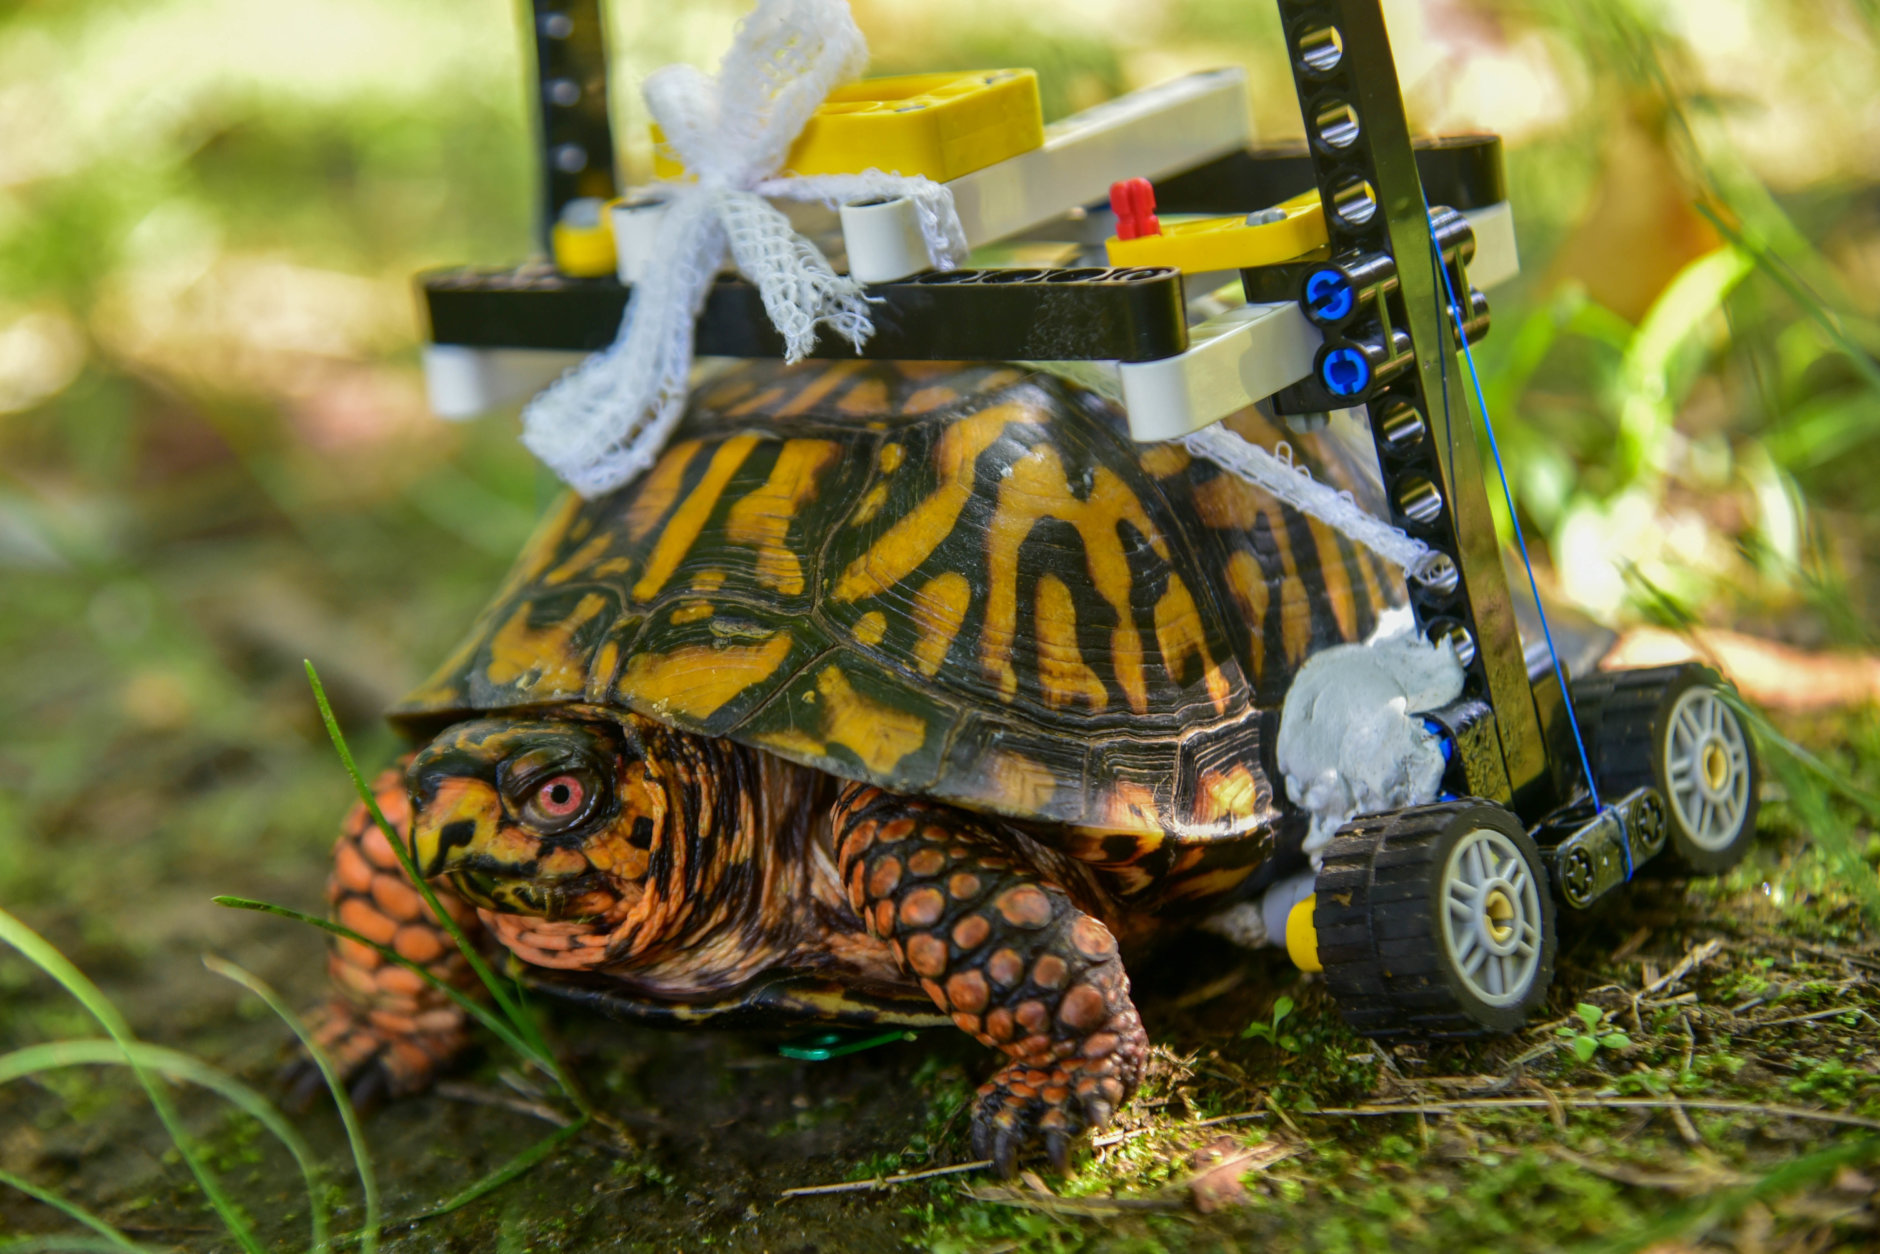 The turtle will likely use the wheelchair into the spring. (Courtesy Maryland Zoo/Sinclair Miller) 